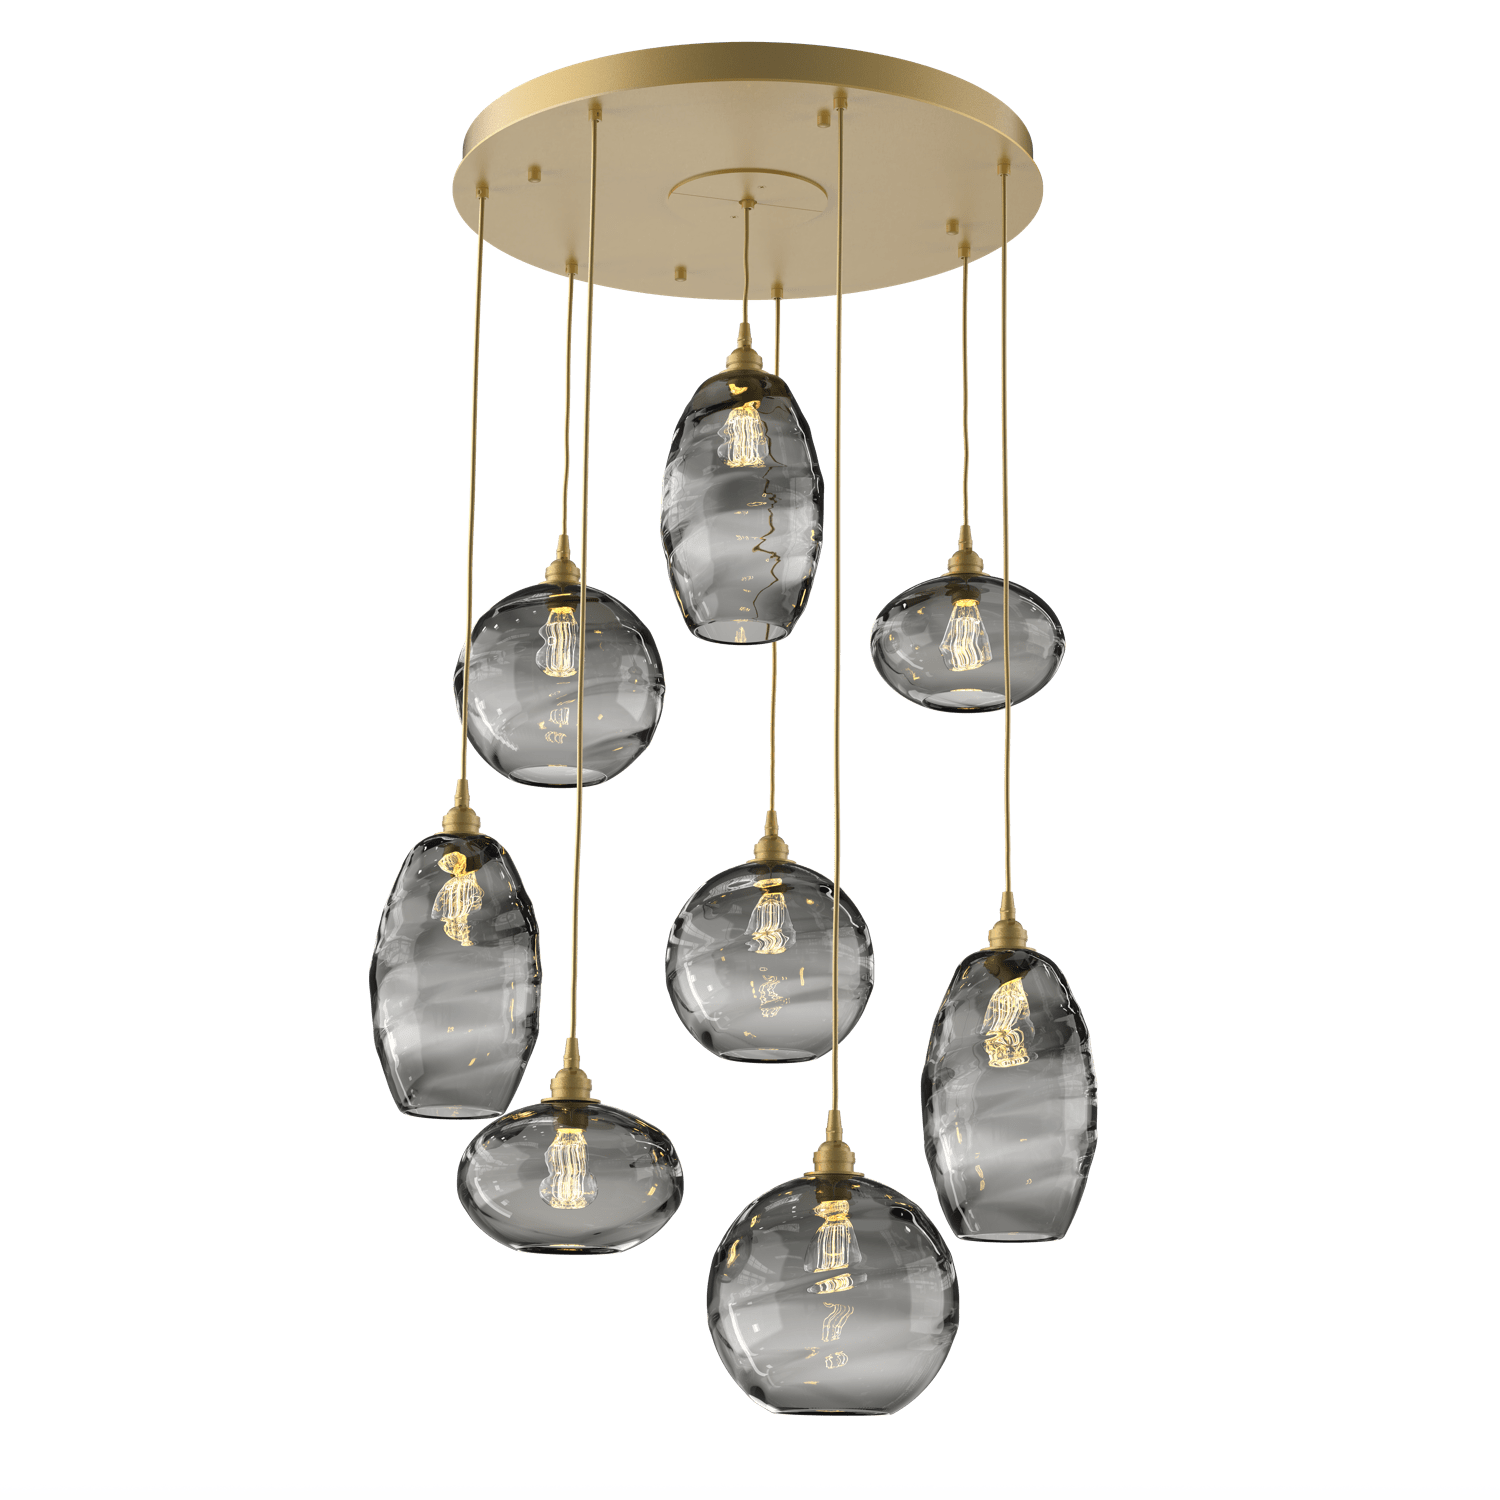 CHB0048-08-GB-OS-Hammerton-Studio-Optic-Blown-Glass-Misto-8-light-round-pendant-chandelier-with-gilded-brass-finish-and-optic-smoke-blown-glass-shades-and-incandescent-lamping